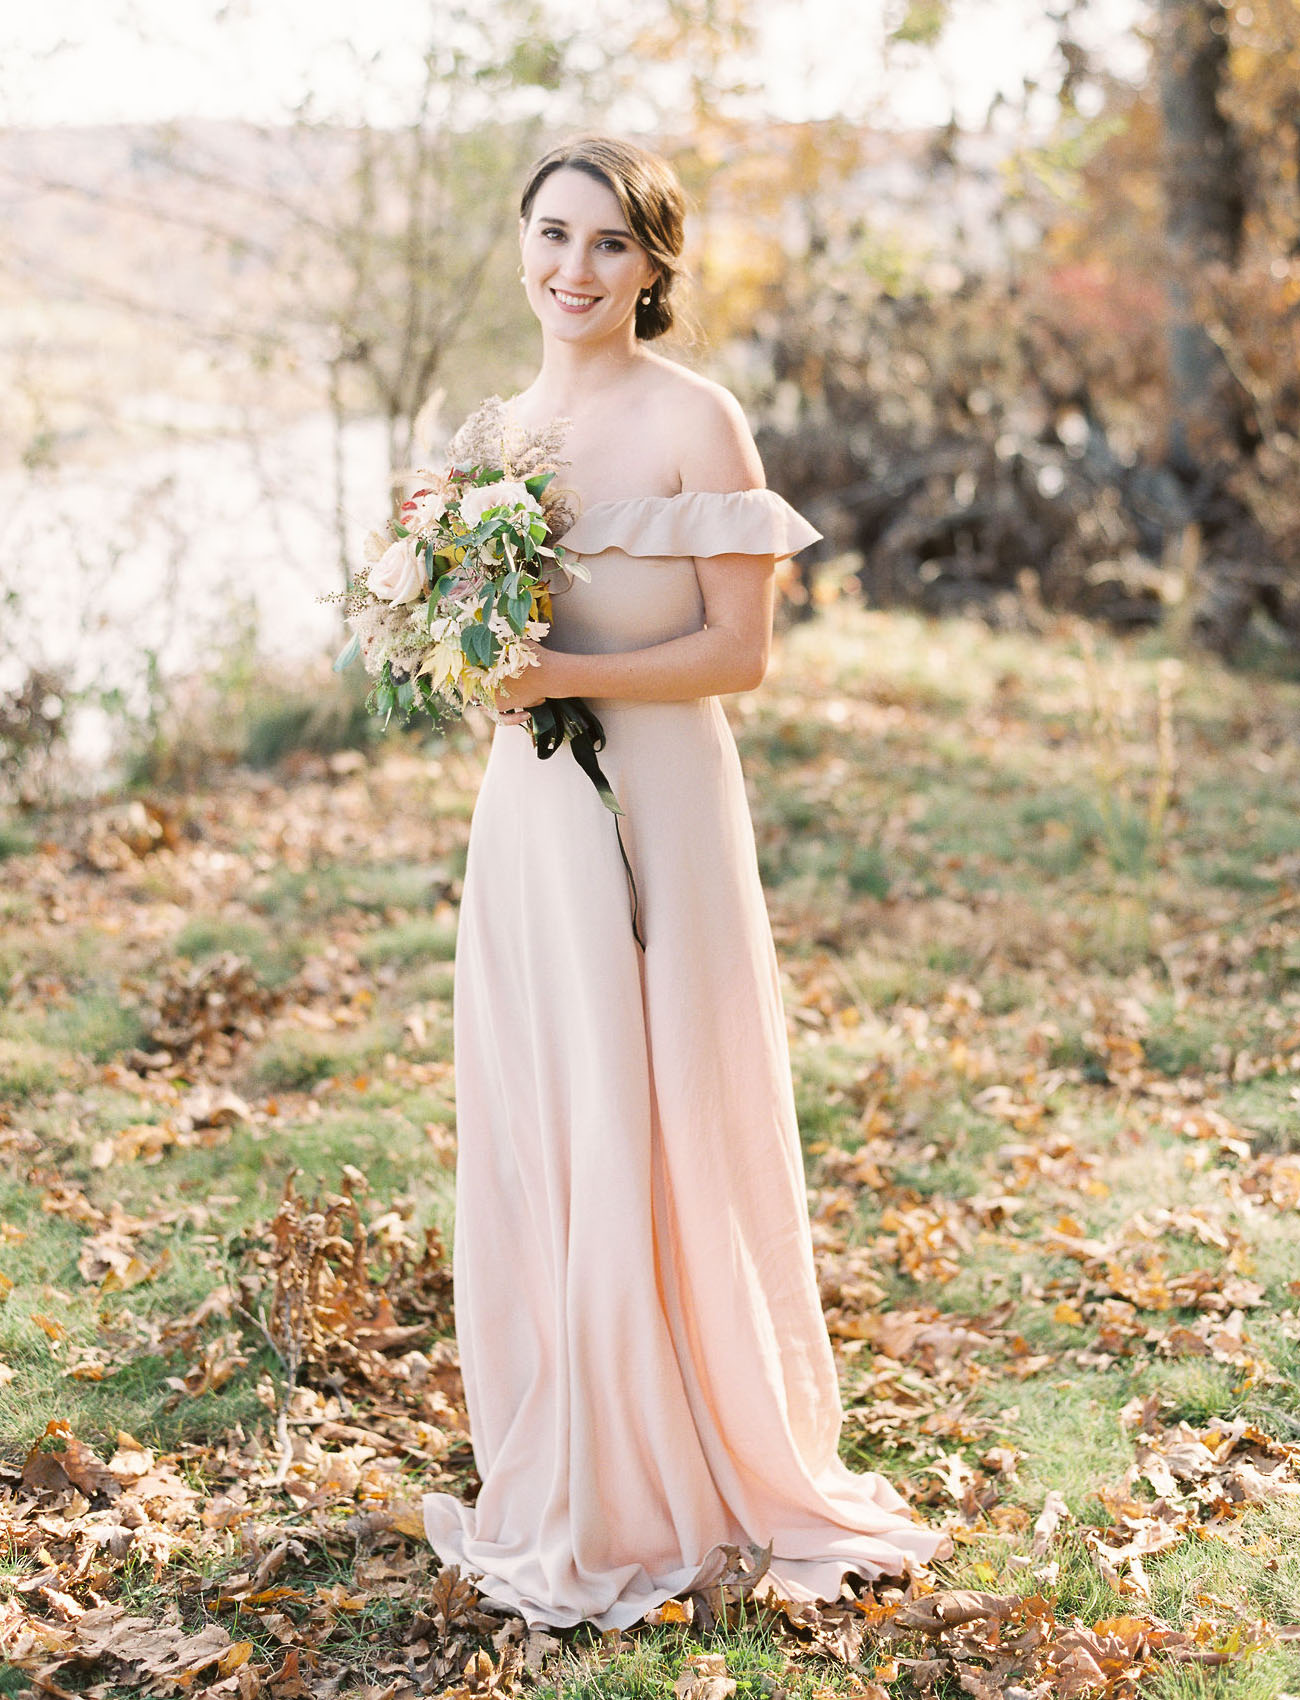 The bride was wearing a blush off the shoulder fitting dress, an updo and statement earrings